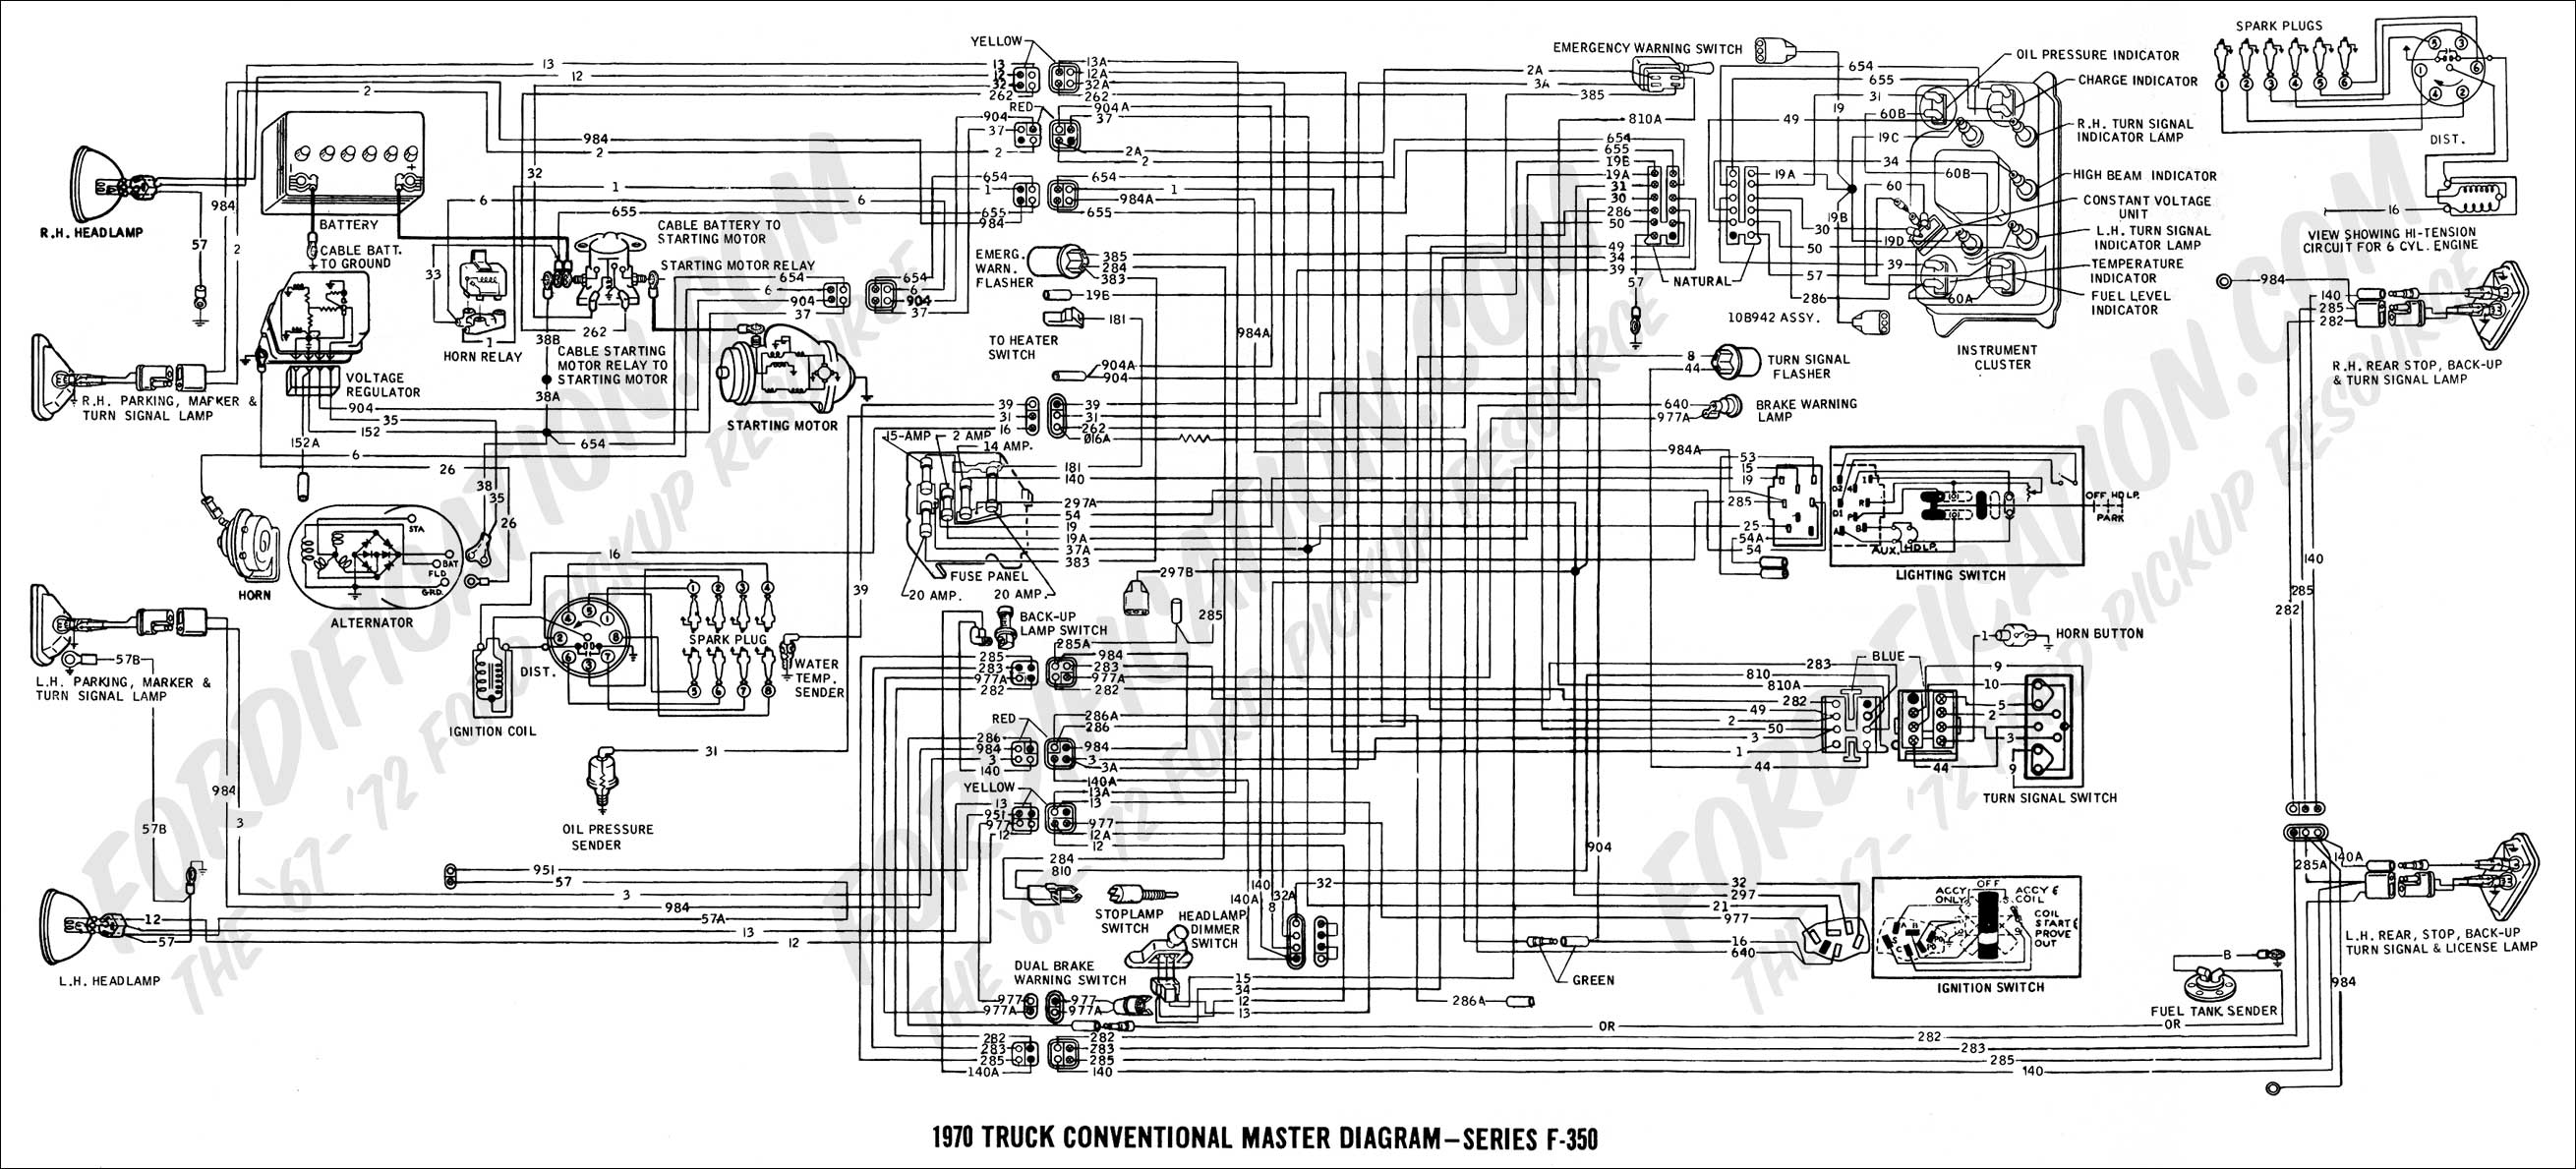 Ford Truck Technical Drawings and Schematics - Section H - Wiring Diagrams  1970 Ford Bronco Dash Wiring Diagram    FORDification.com